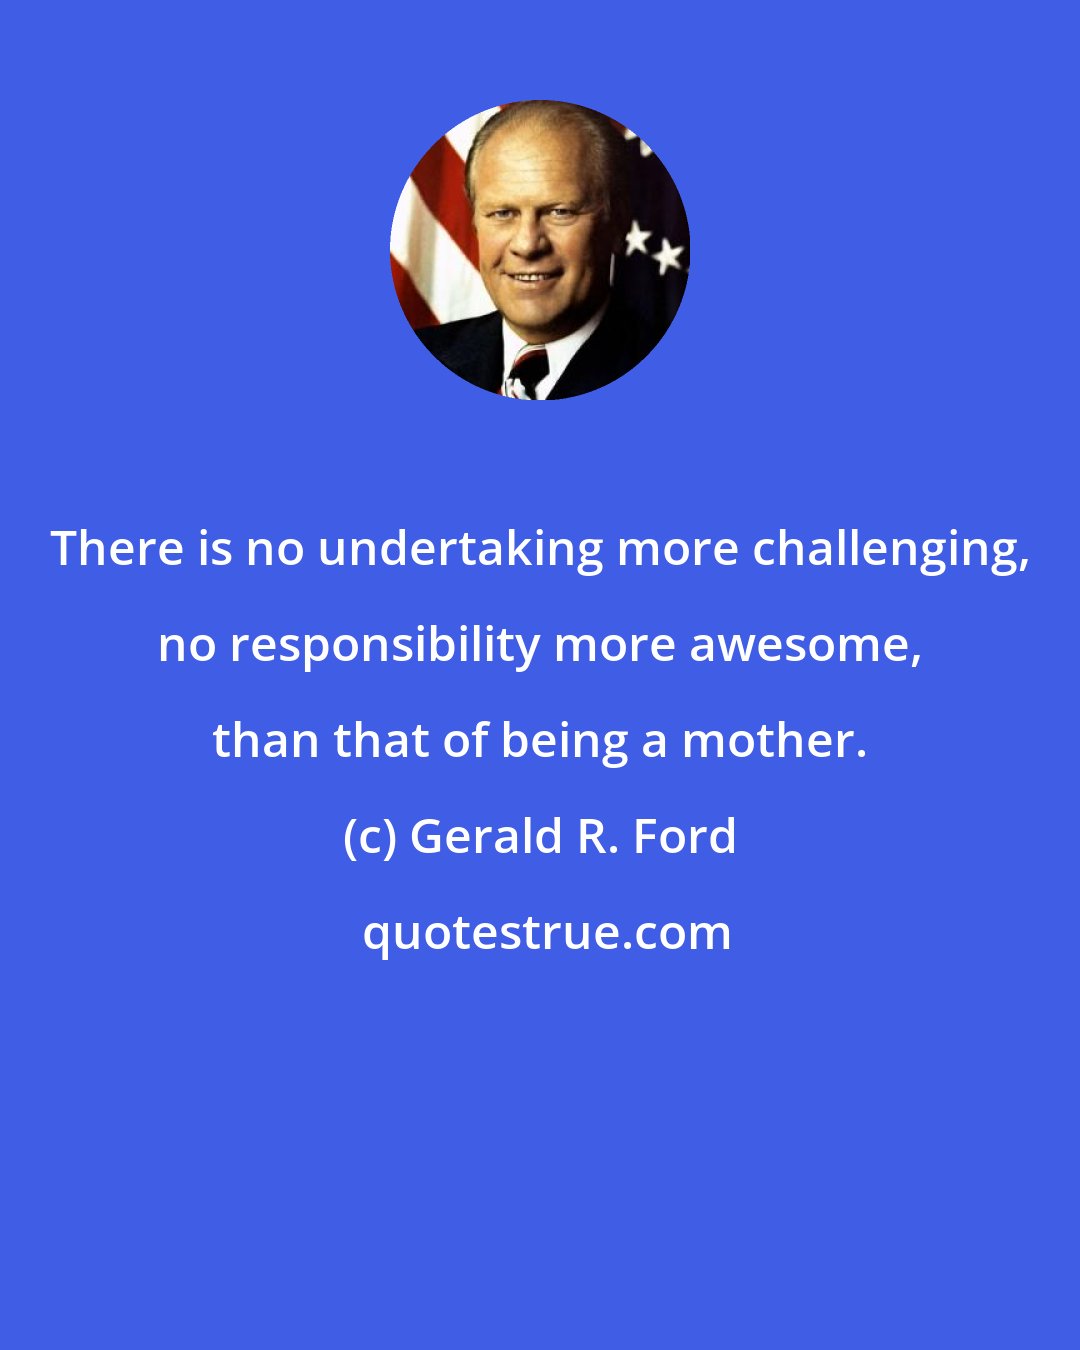 Gerald R. Ford: There is no undertaking more challenging, no responsibility more awesome, than that of being a mother.